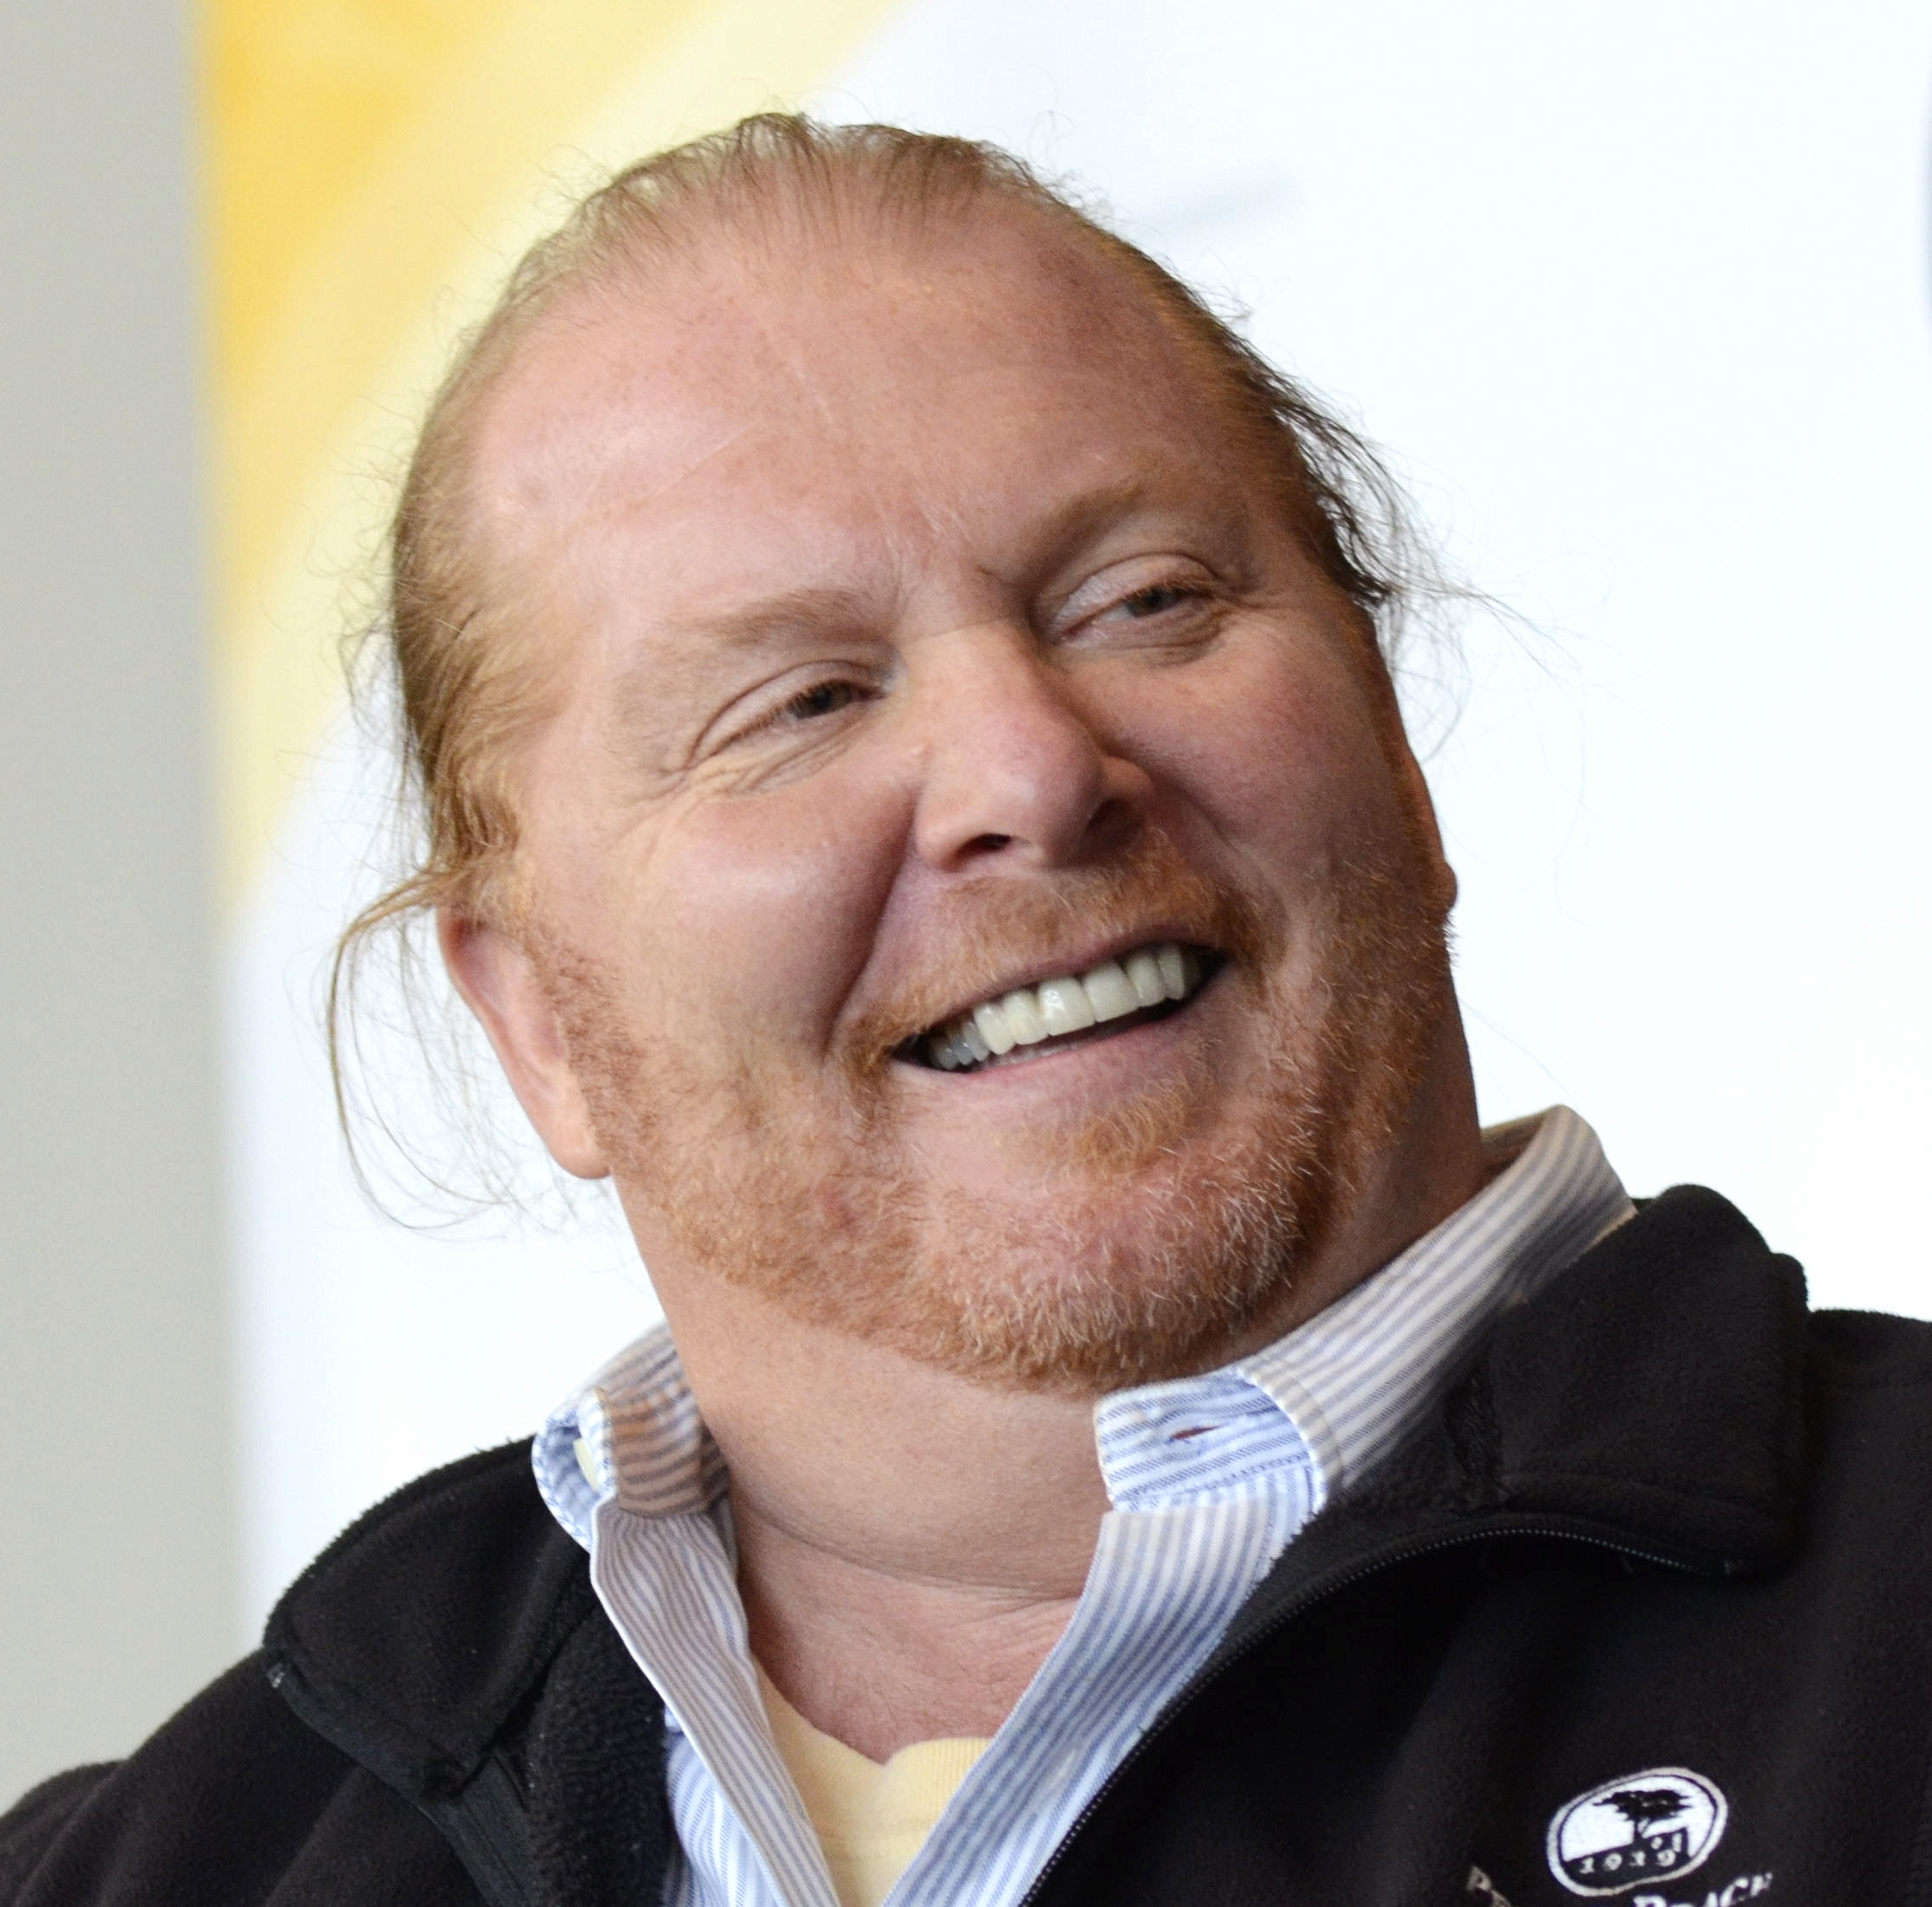 Chef Mario Batali gets unlinked with U.S. restaurants iver sexual abuse charges